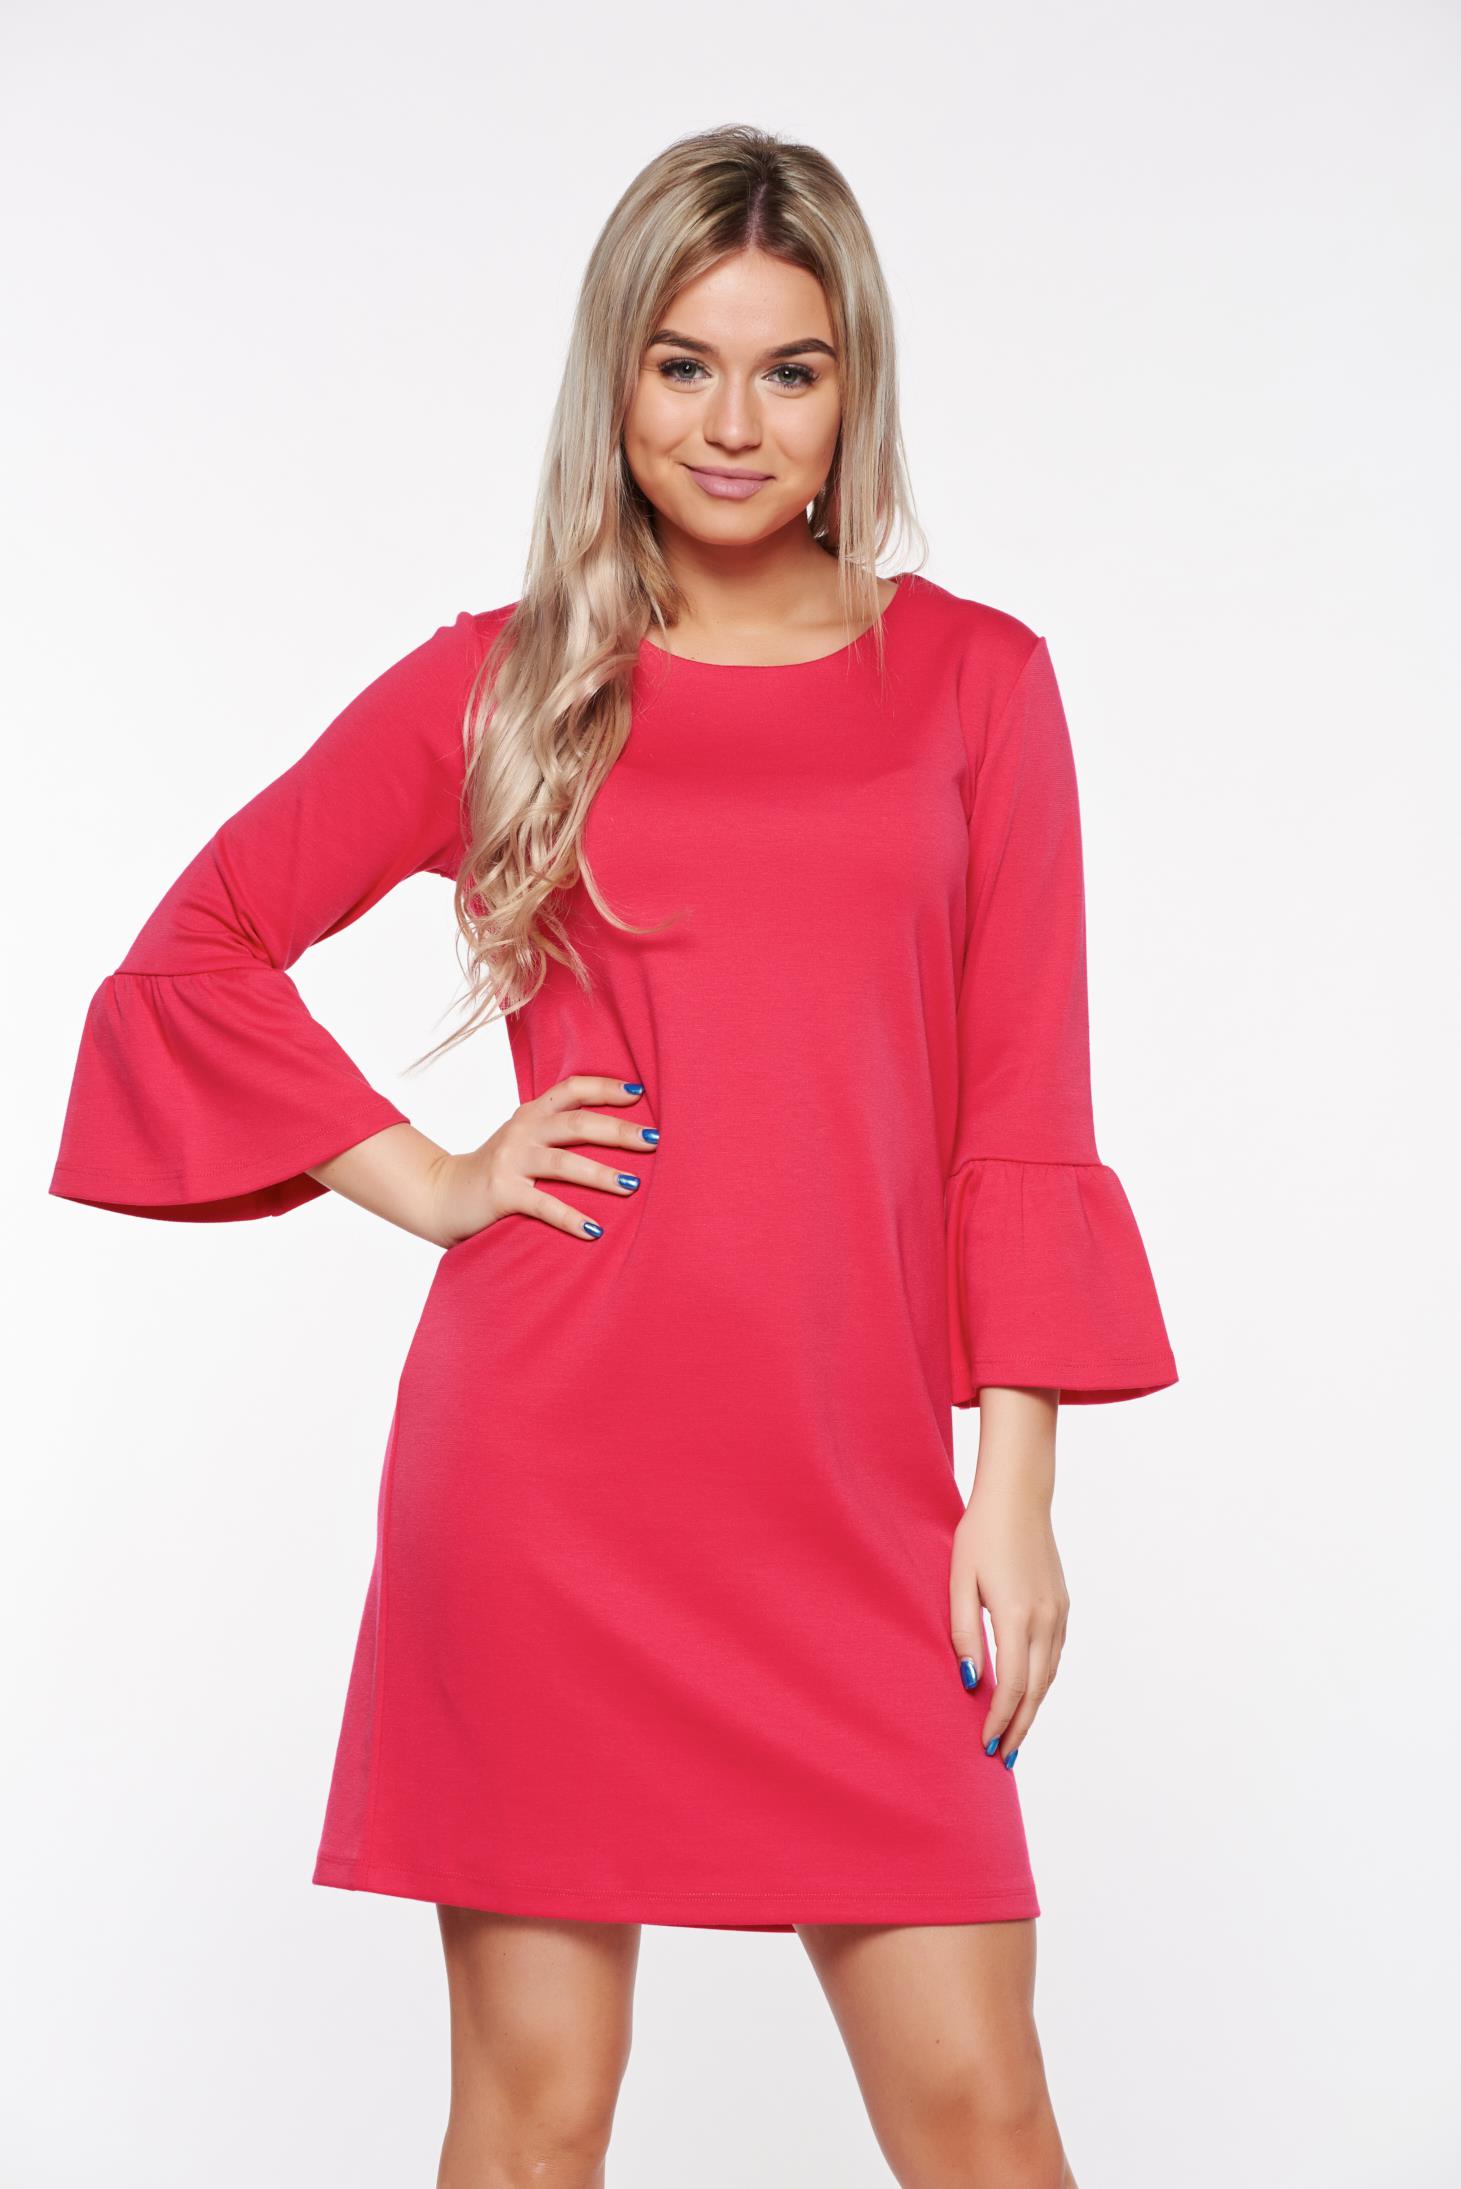 Top Secret coral dress casual flared with ruffled sleeves